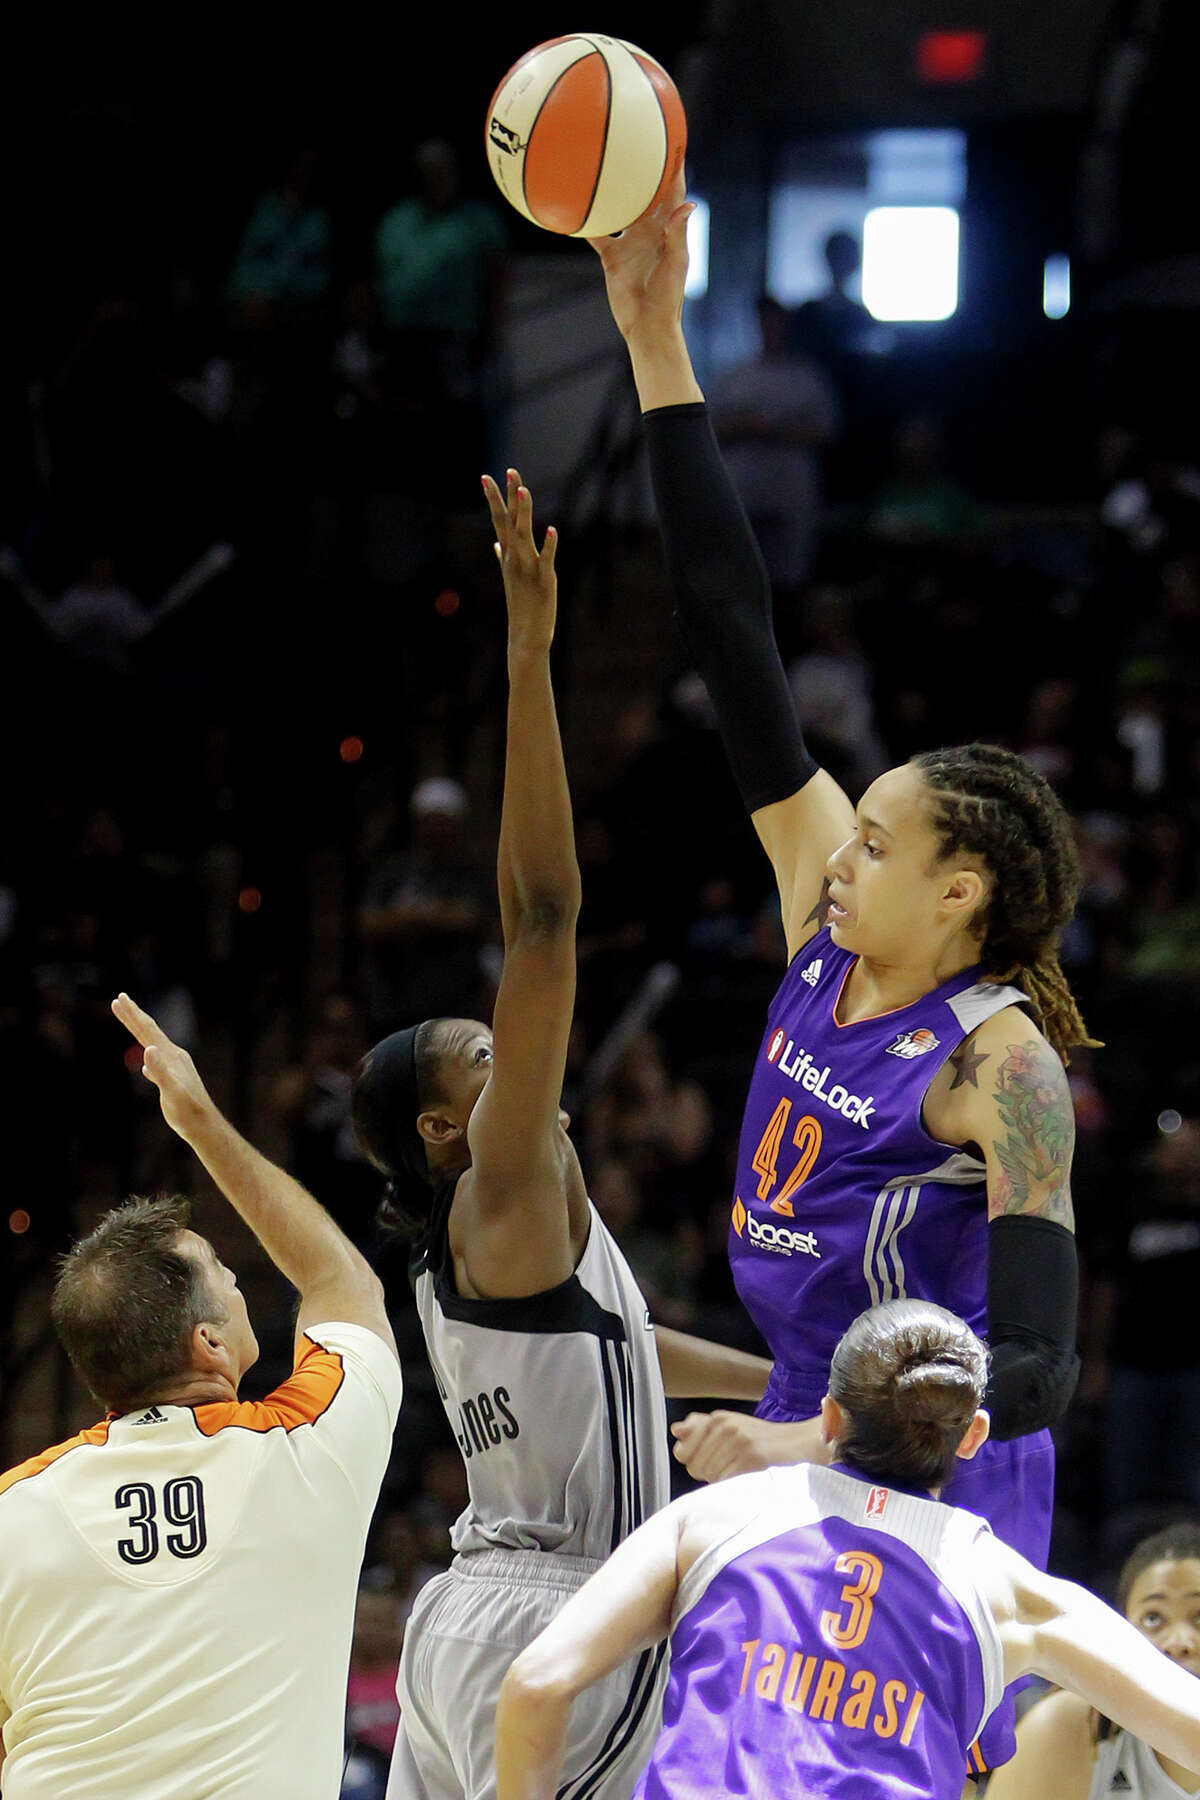 Brittney Griner (right) of Phoenix controls the opening tip in the Silver Stars game with the Phoenix Mercury at the AT&T Center on Tuesday, June 25, 2013. The game was former Baylor standout Brittney Griner's first trip to play in her home state. Phoenix won the game 83-77. MARVIN PFEIFFER/ mpfeiffer@express-news.net